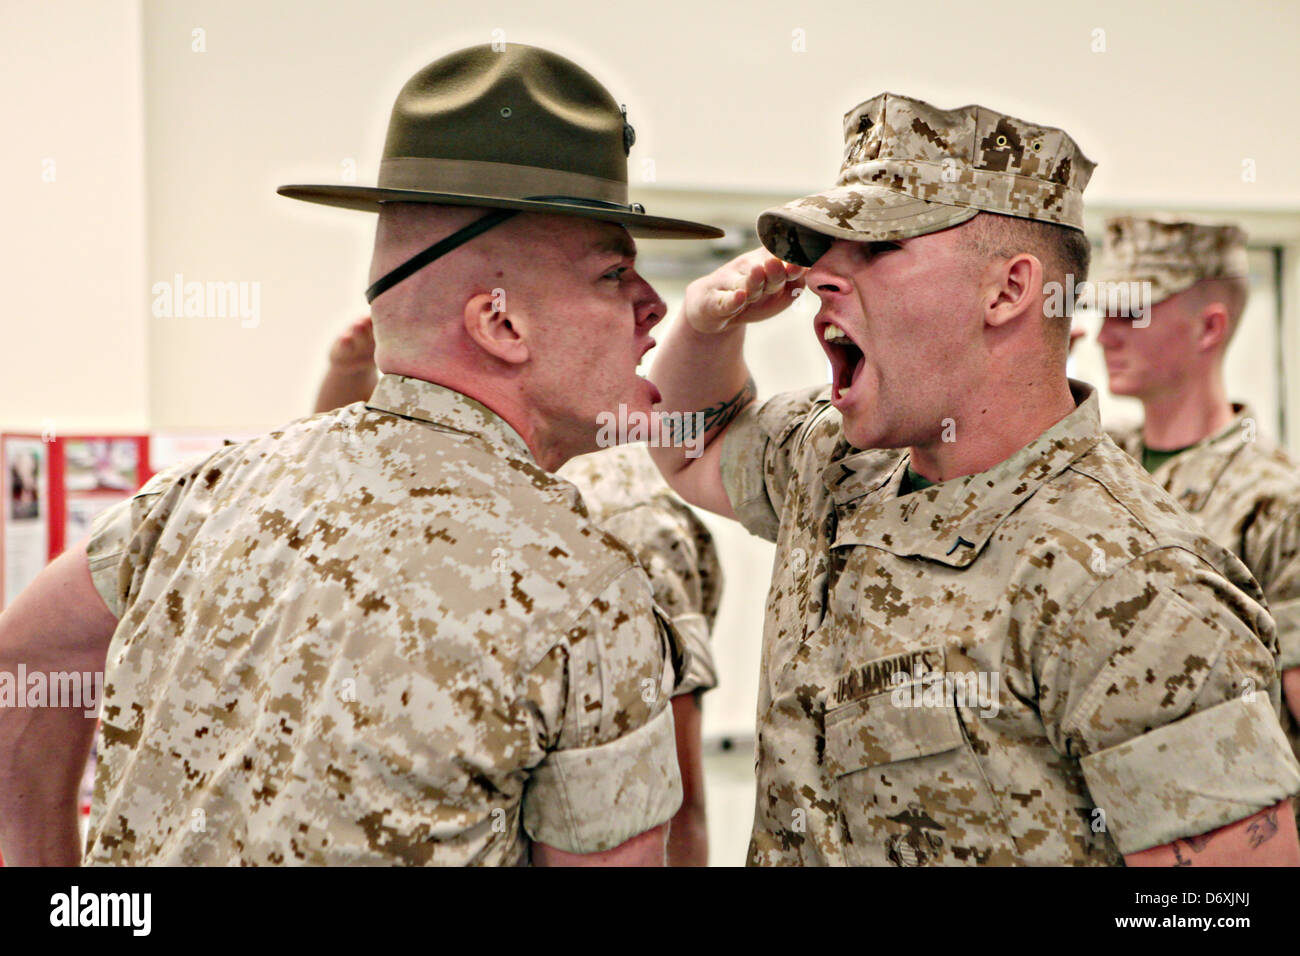 A US Marine Corps drill instructor screams at a Marine recruit during boot camp at Camp Johnson March 31, 2011 Jacksonville, NC. Stock Photo